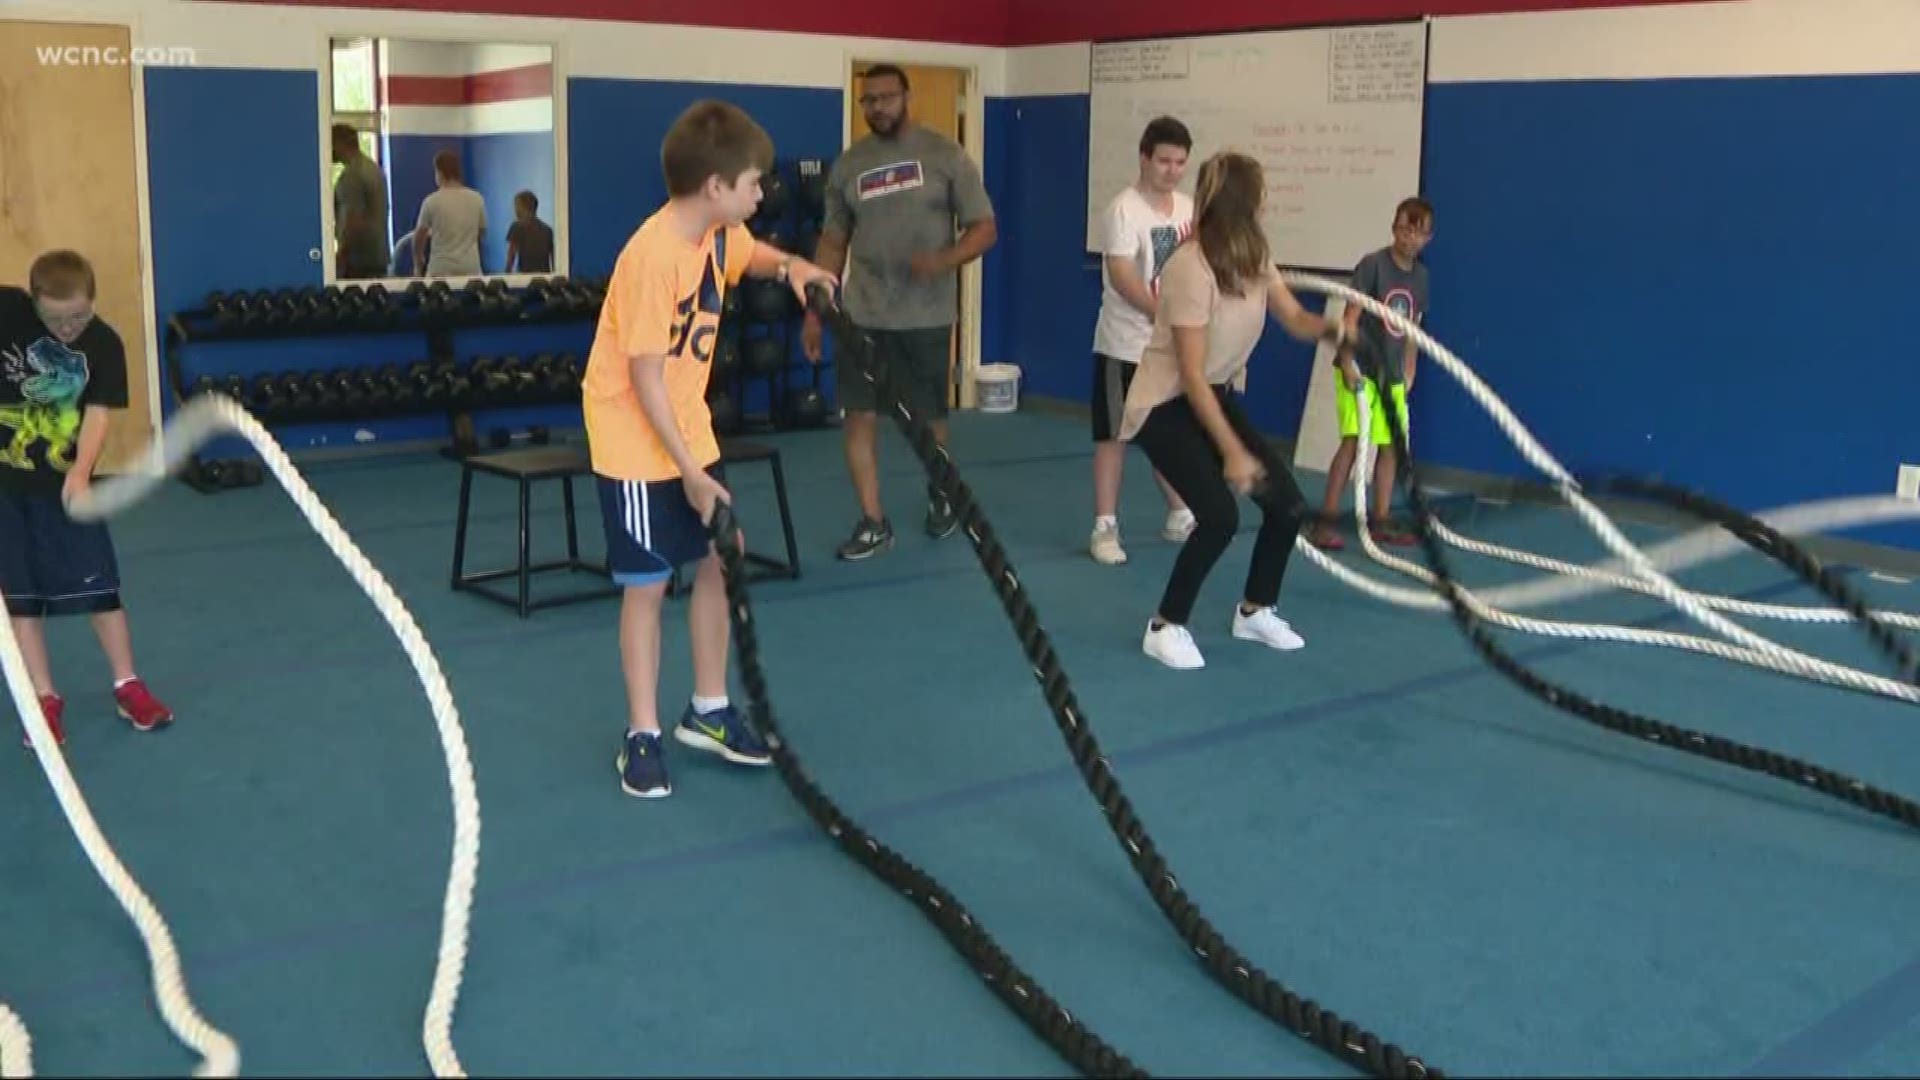 New exercise class for kids with disabilities gets rave reviews